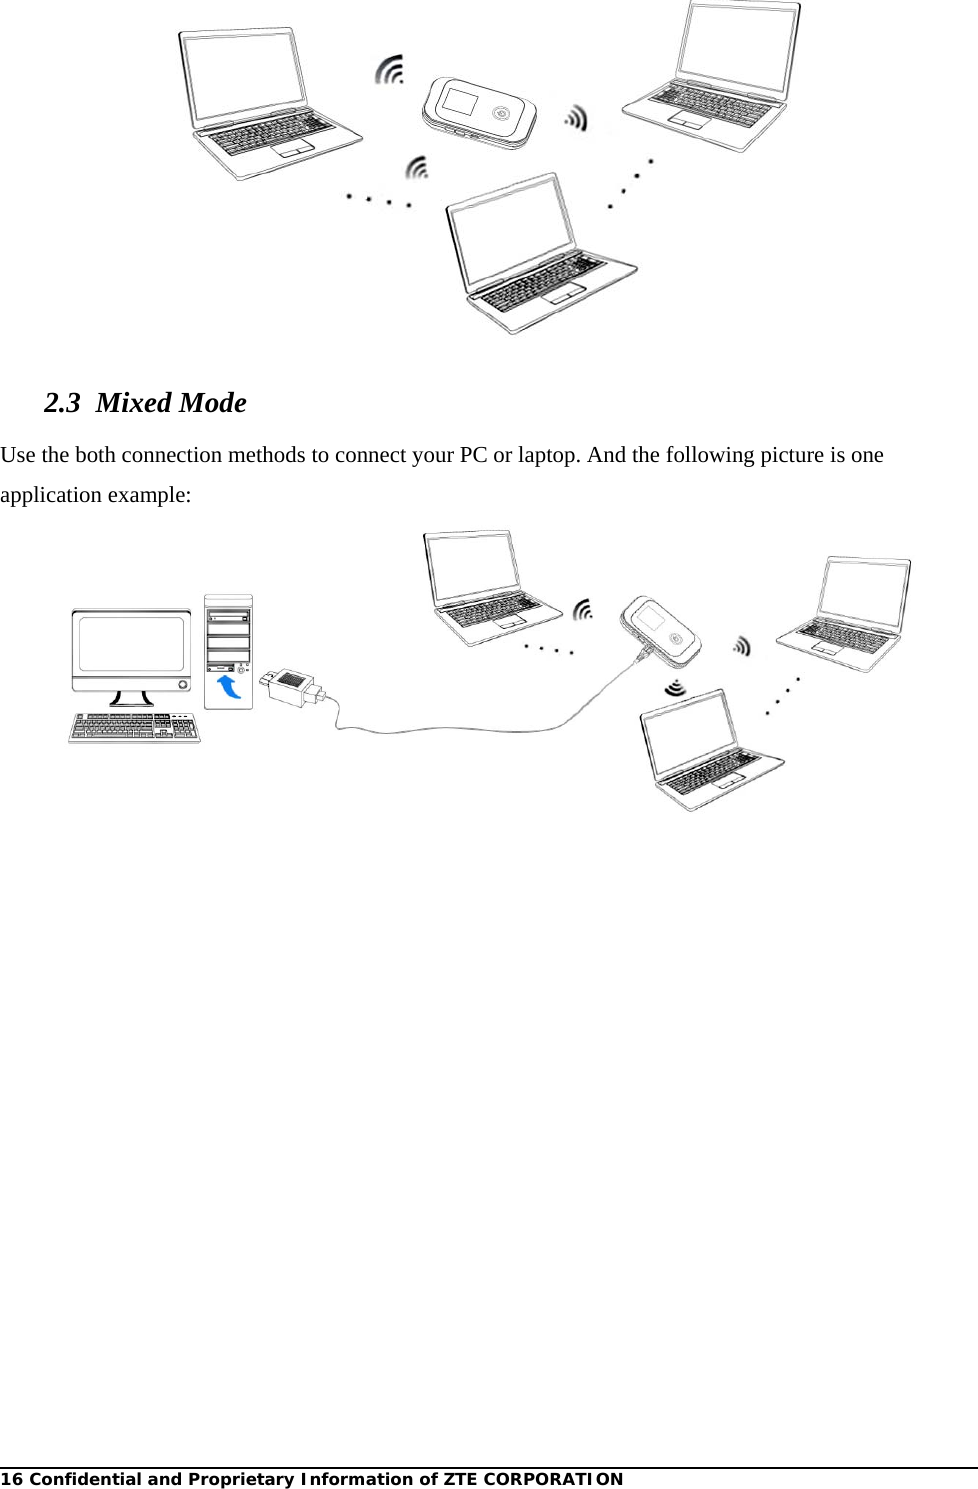 16 Confidential and Proprietary Information of ZTE CORPORATION 2.3 Mixed Mode Use the both connection methods to connect your PC or laptop. And the following picture is one application example:  